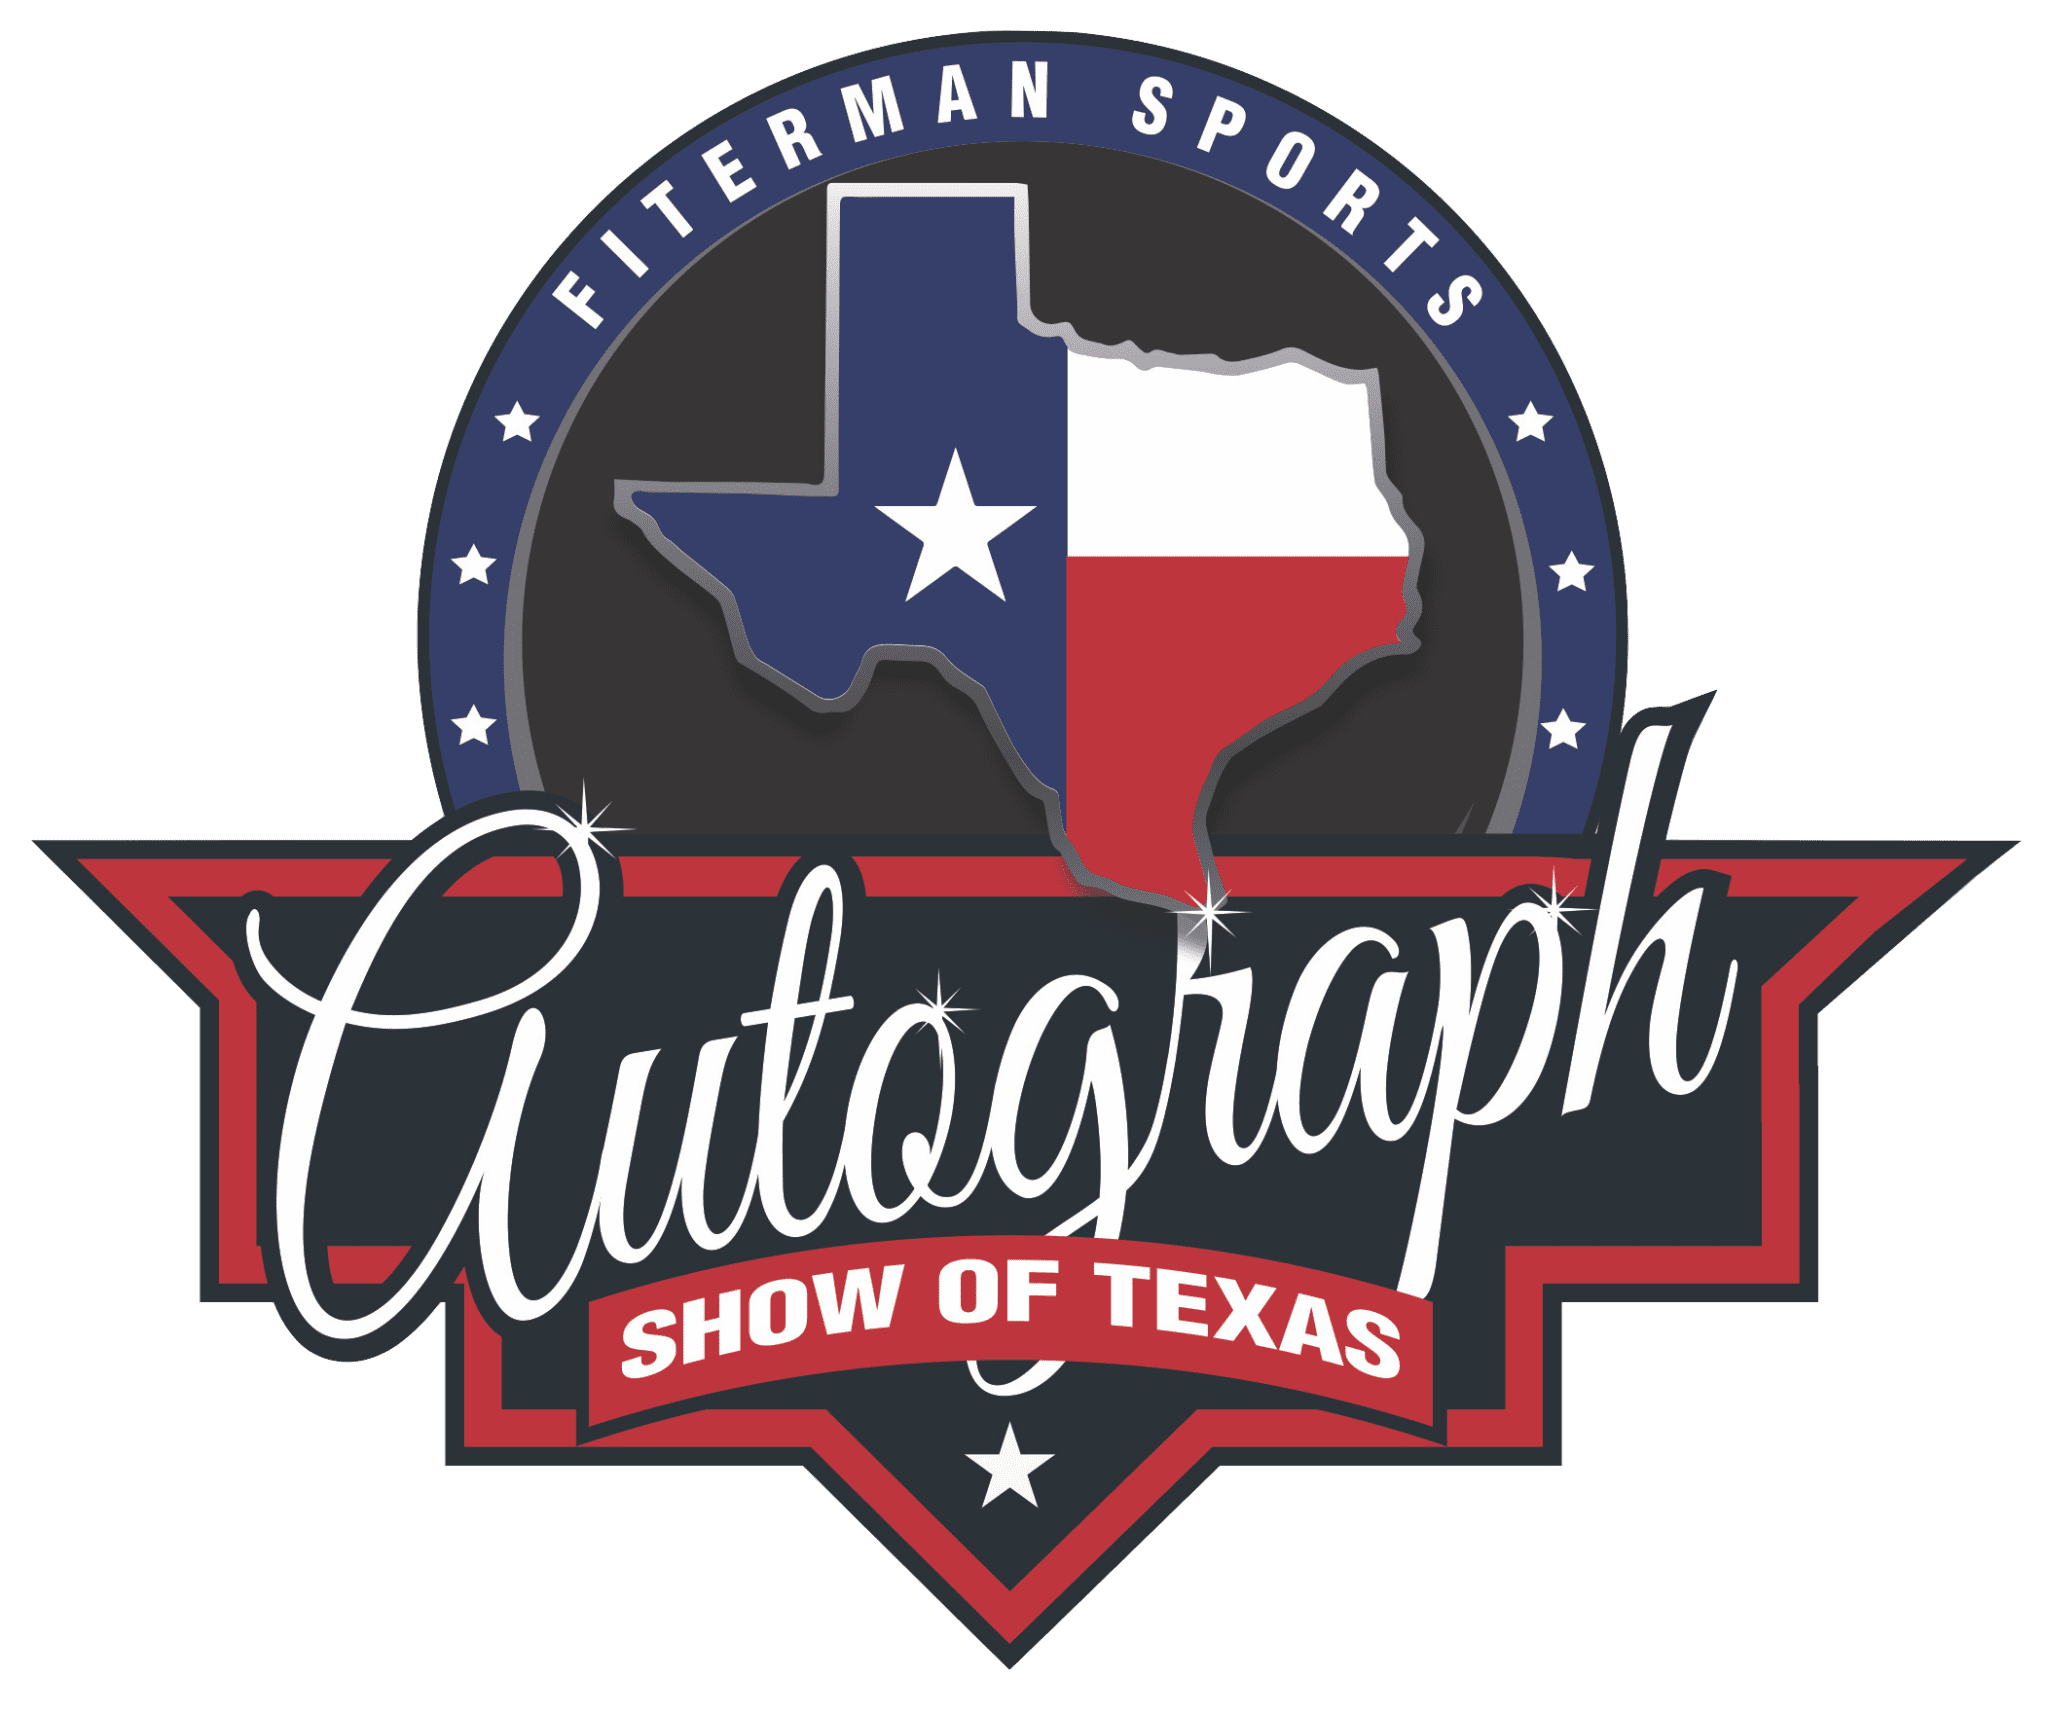 Autograph Show of Texas Fiterman Sports Group